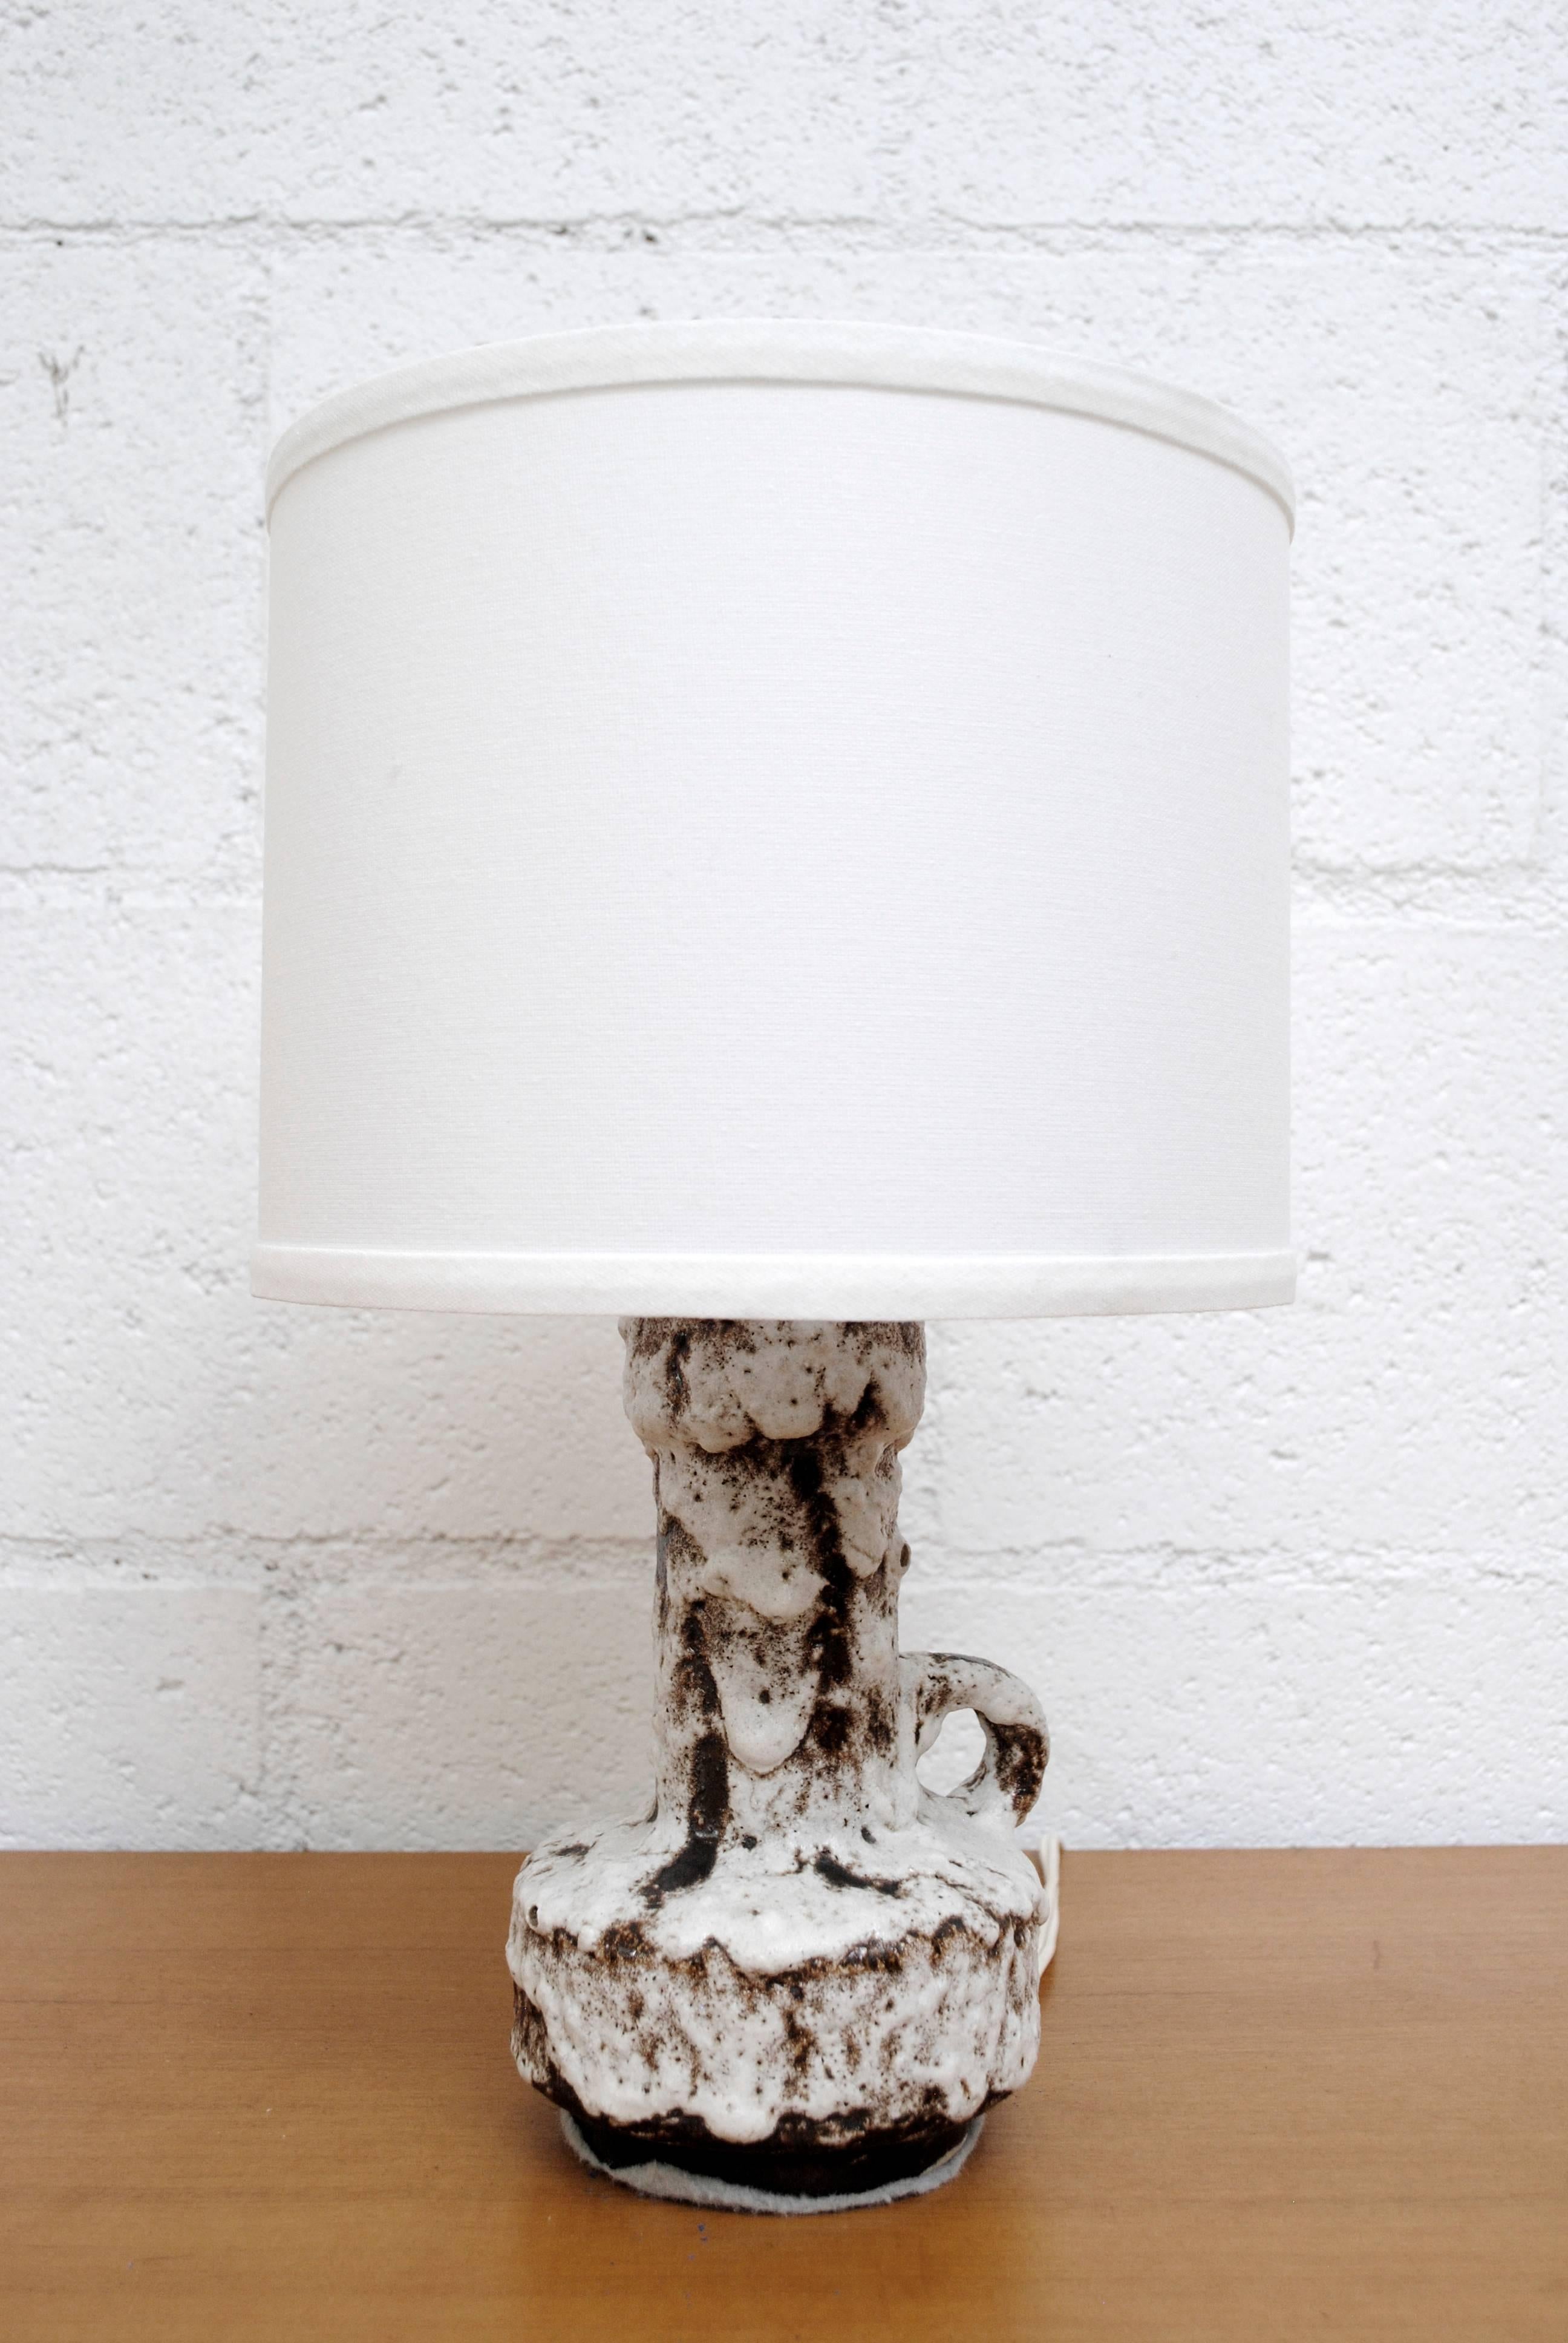 Gorgeous 1970s W. German table lamp with lava cappuccino glaze and new white linen shade (8.25 x 6.325).